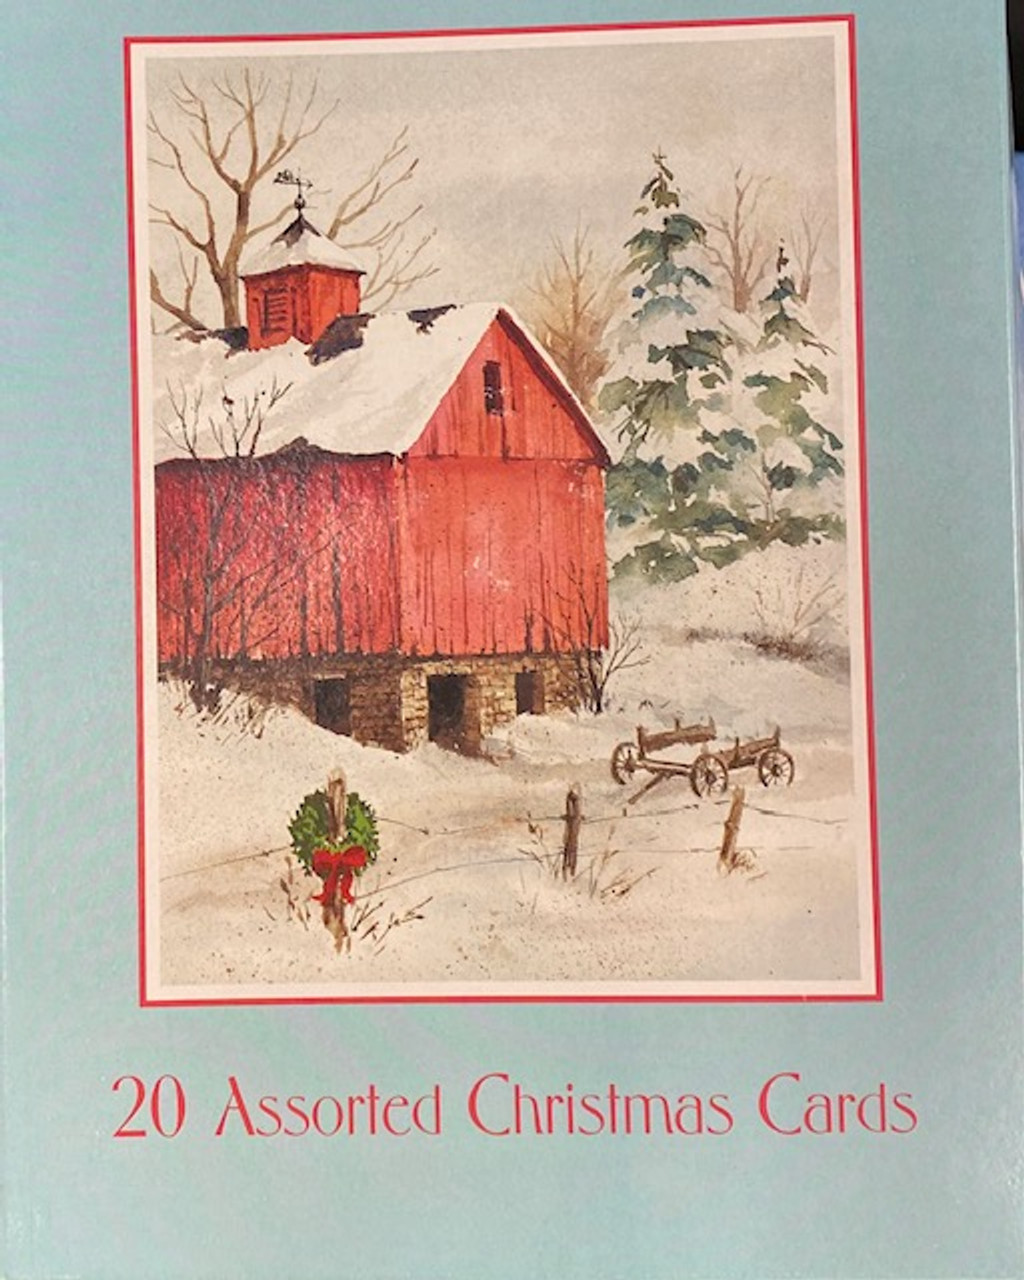 Unused in Original Box! 20 Assorted Vintage Christmas Cards - White Christmas